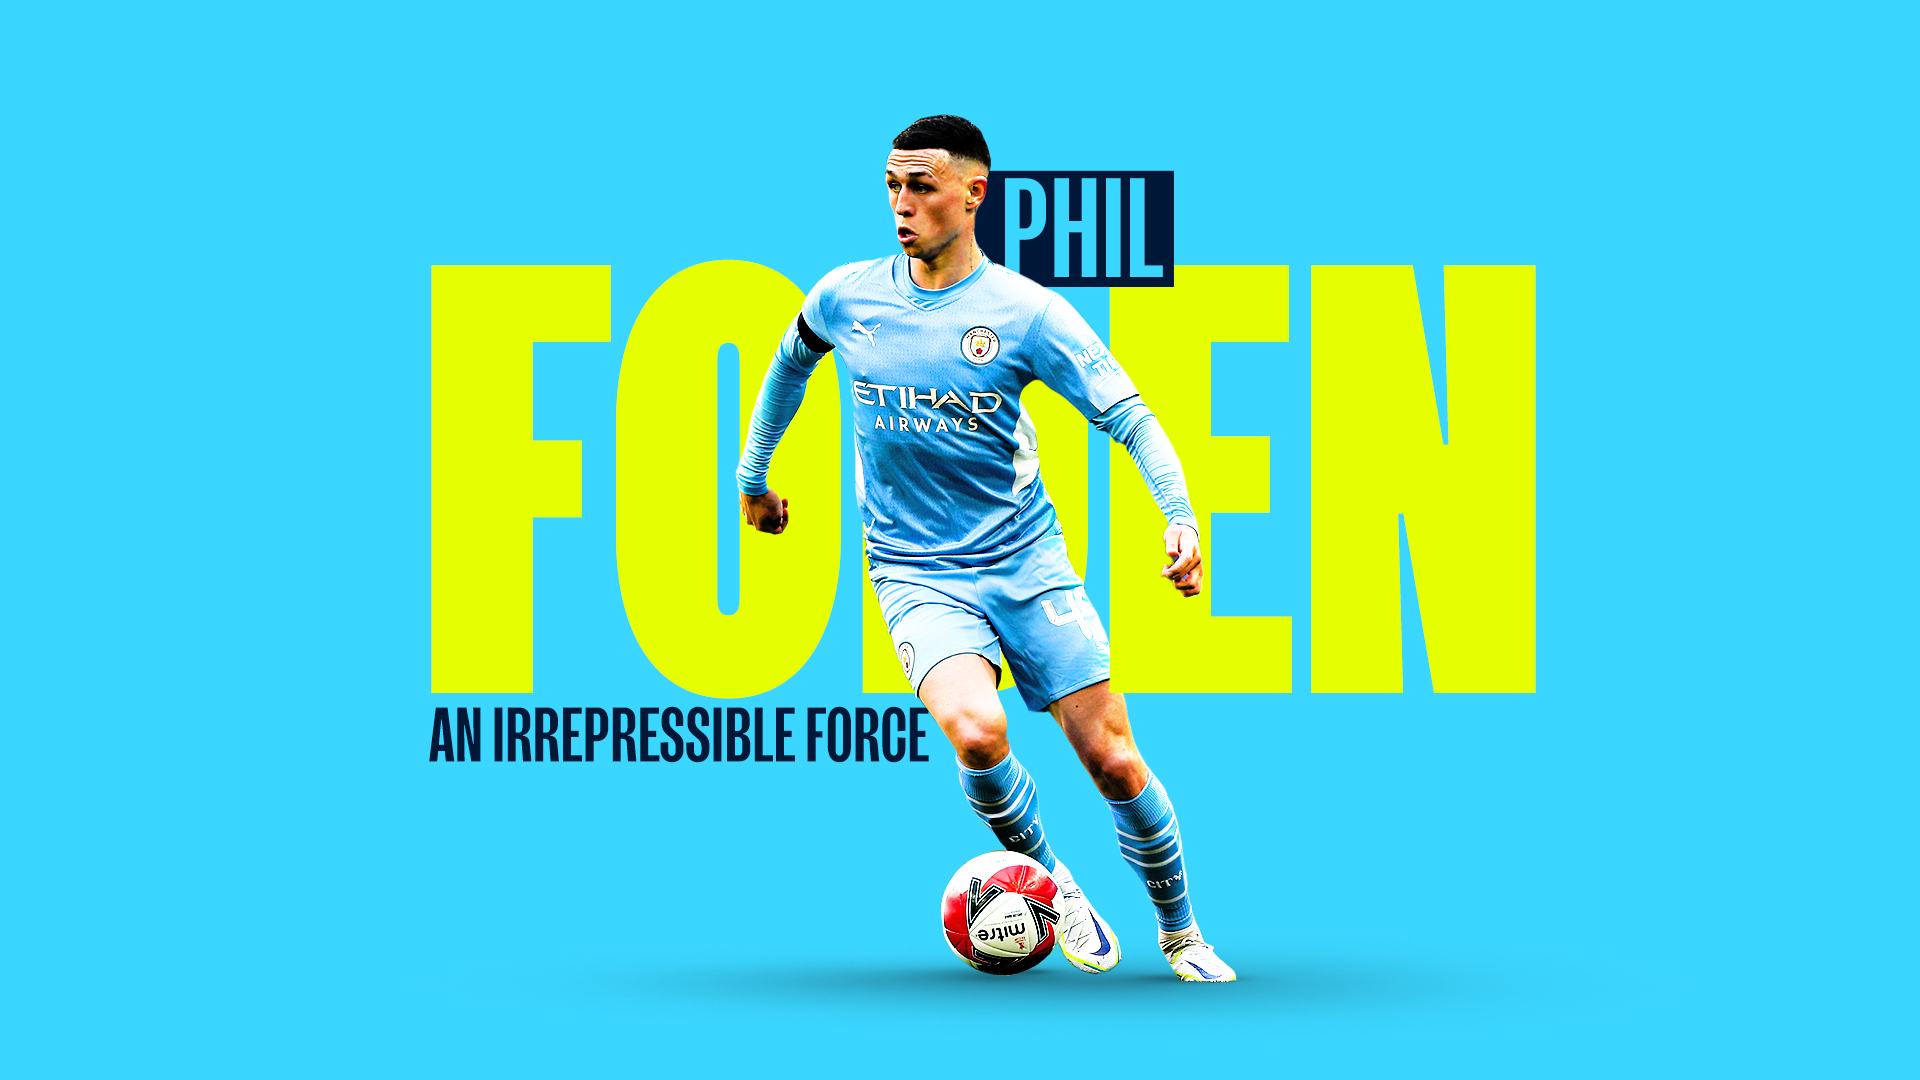 Legendary football player Phil Foden from Manchester City 2K wallpaper  download